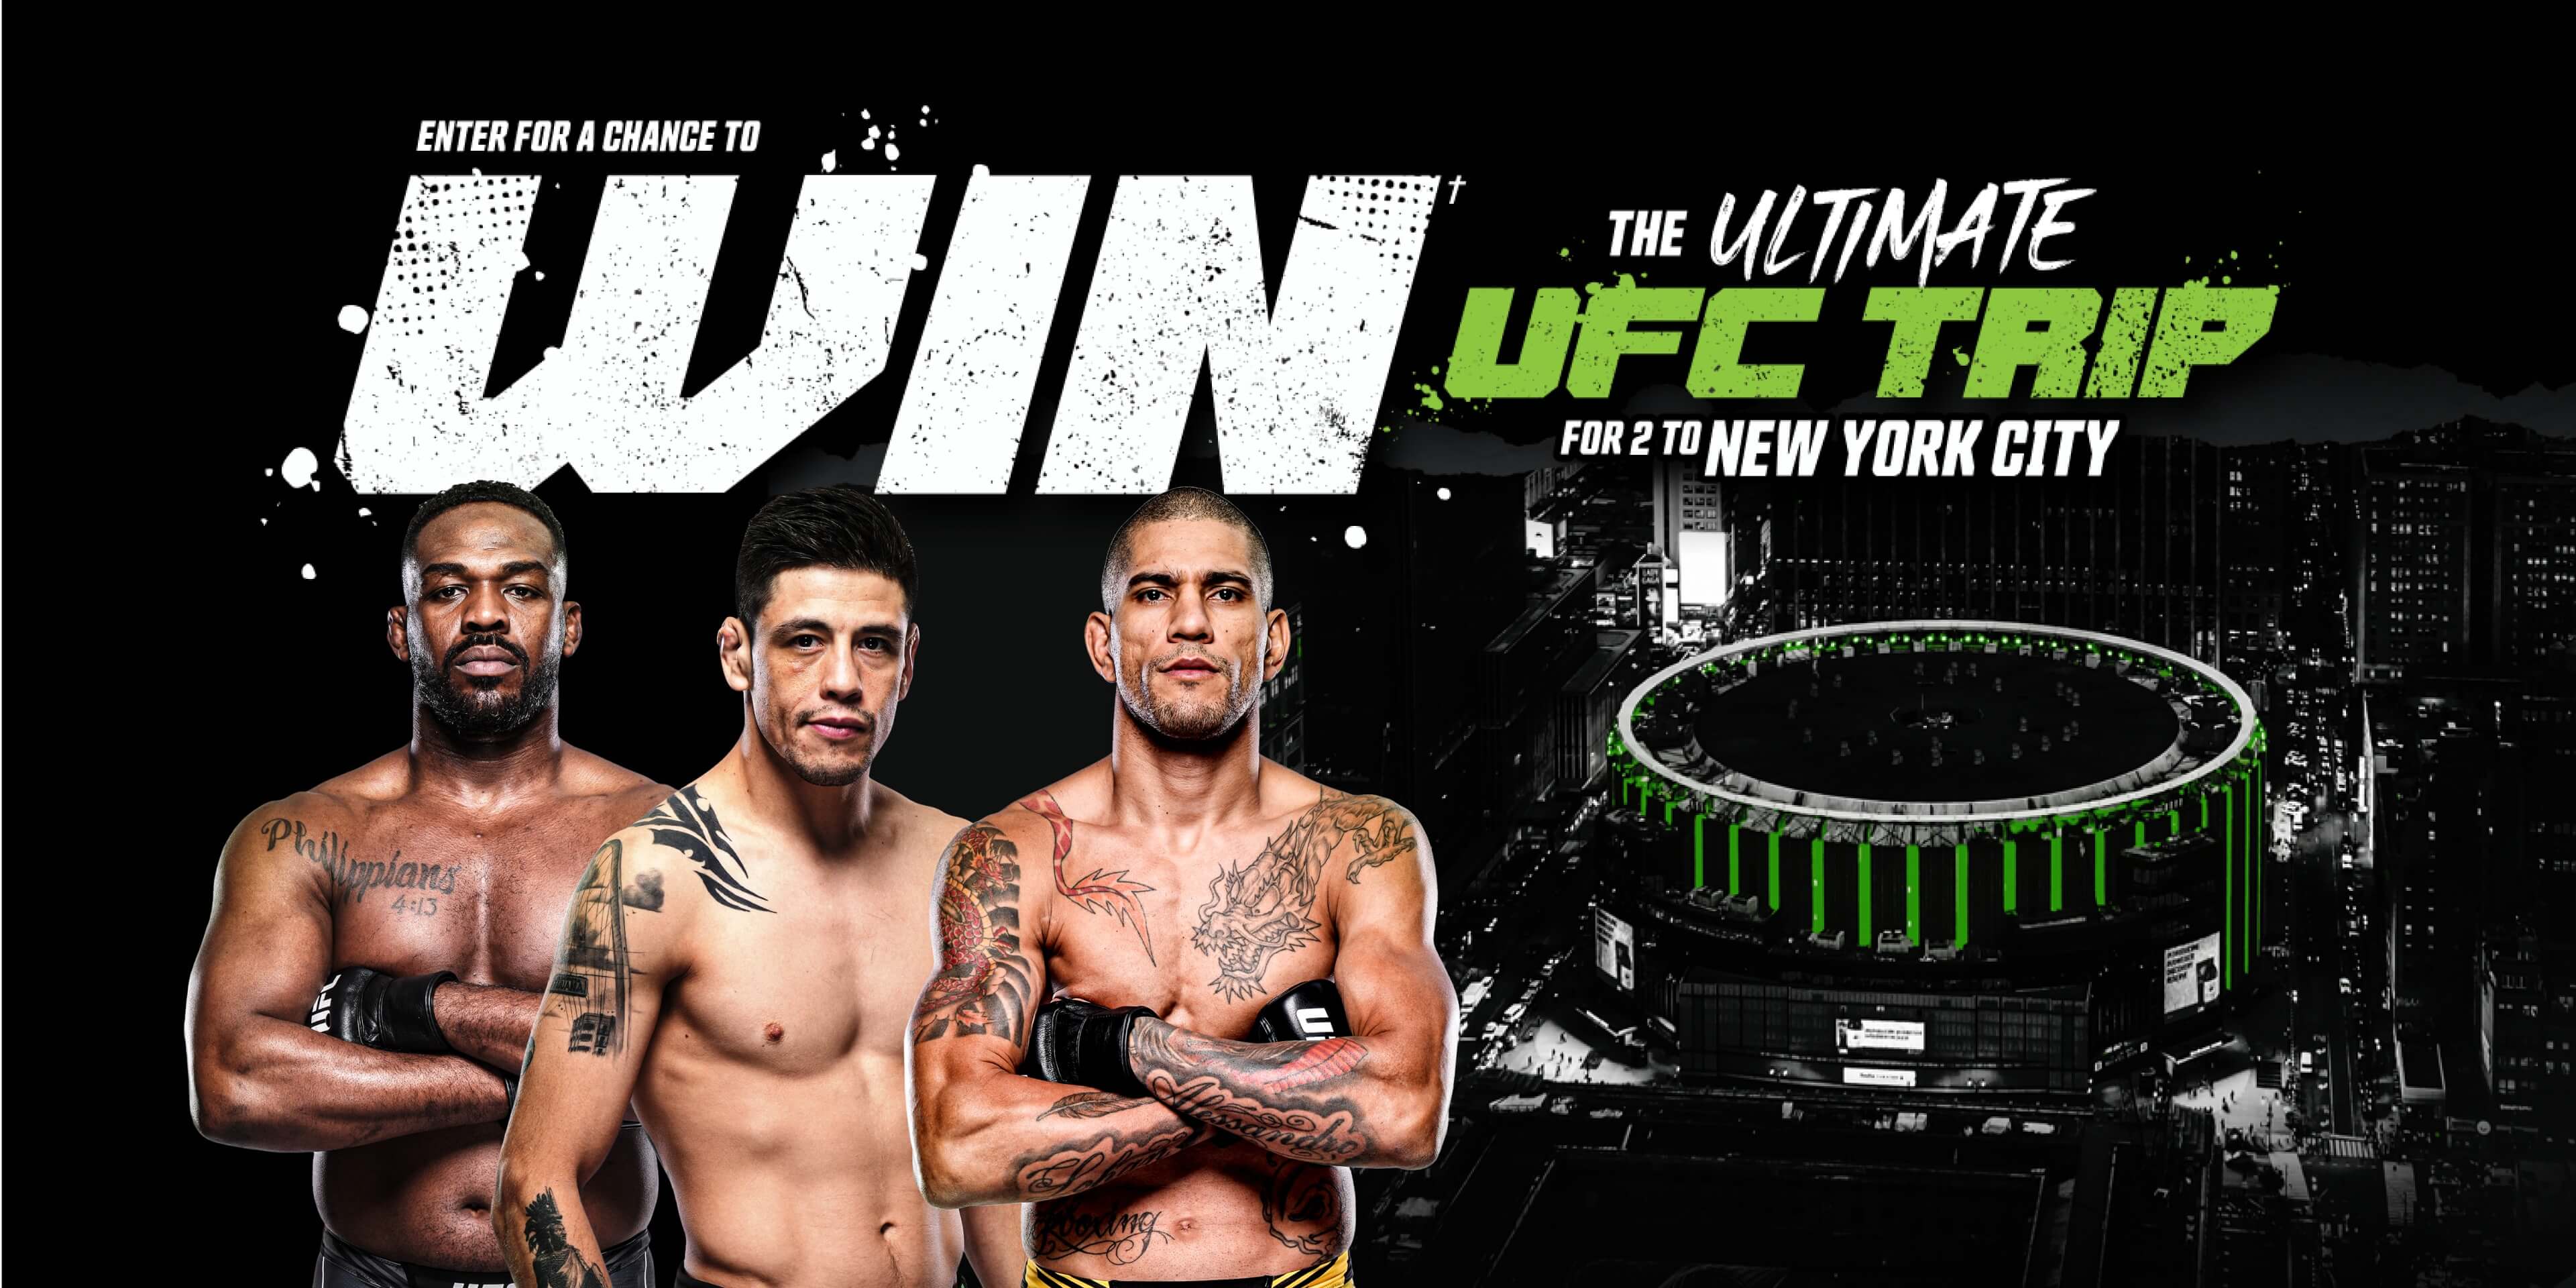 The Ultimate UFC TRIP For 2 to New York City.